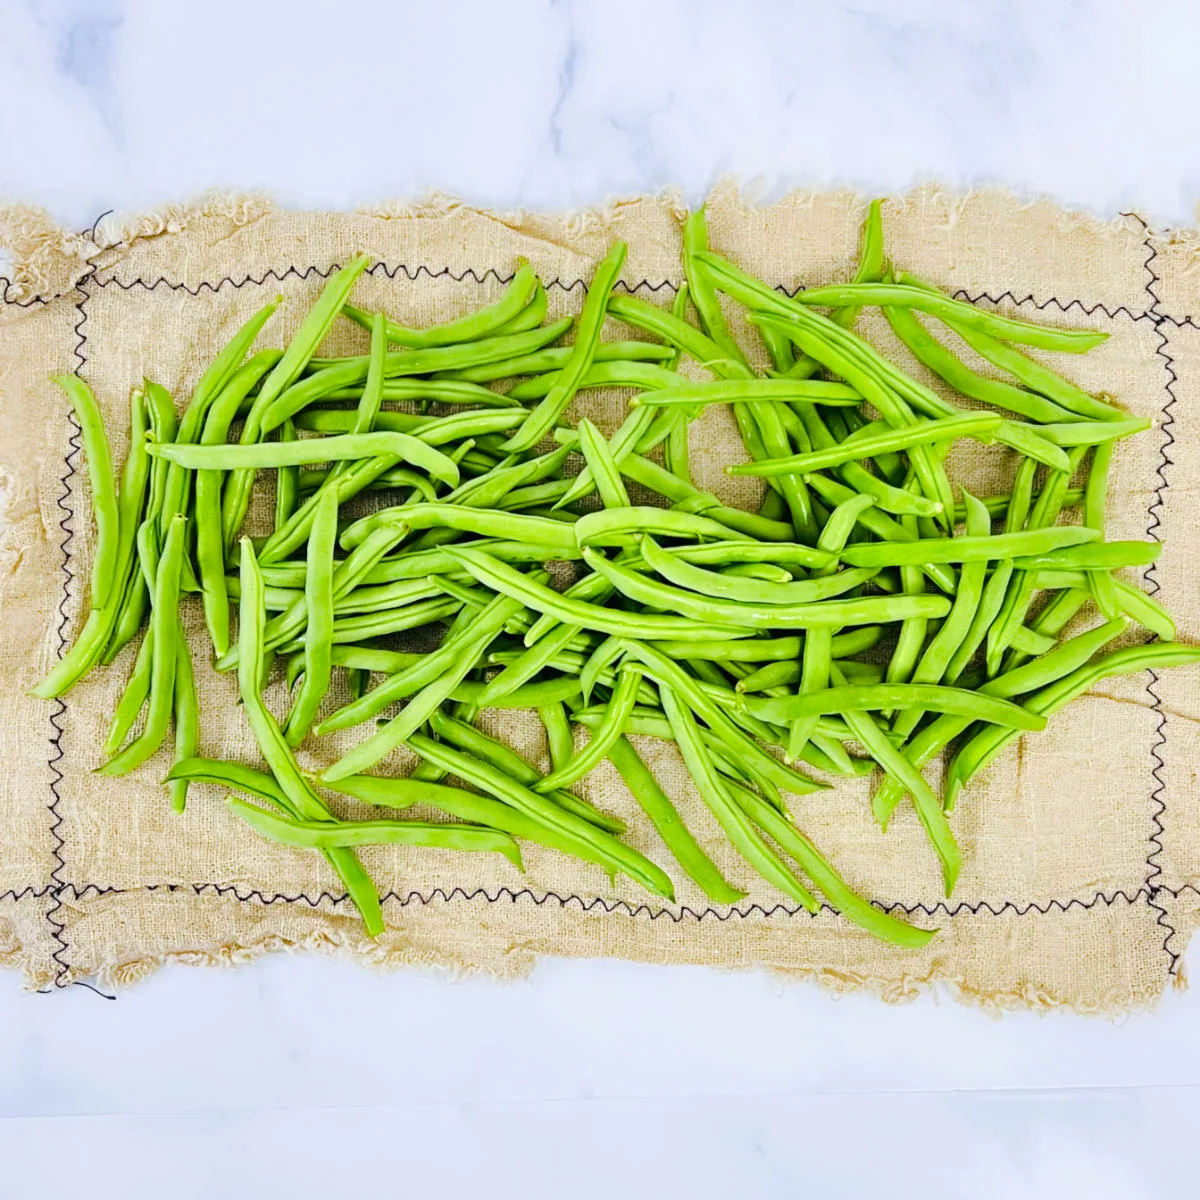 Wash and dry the green beans.